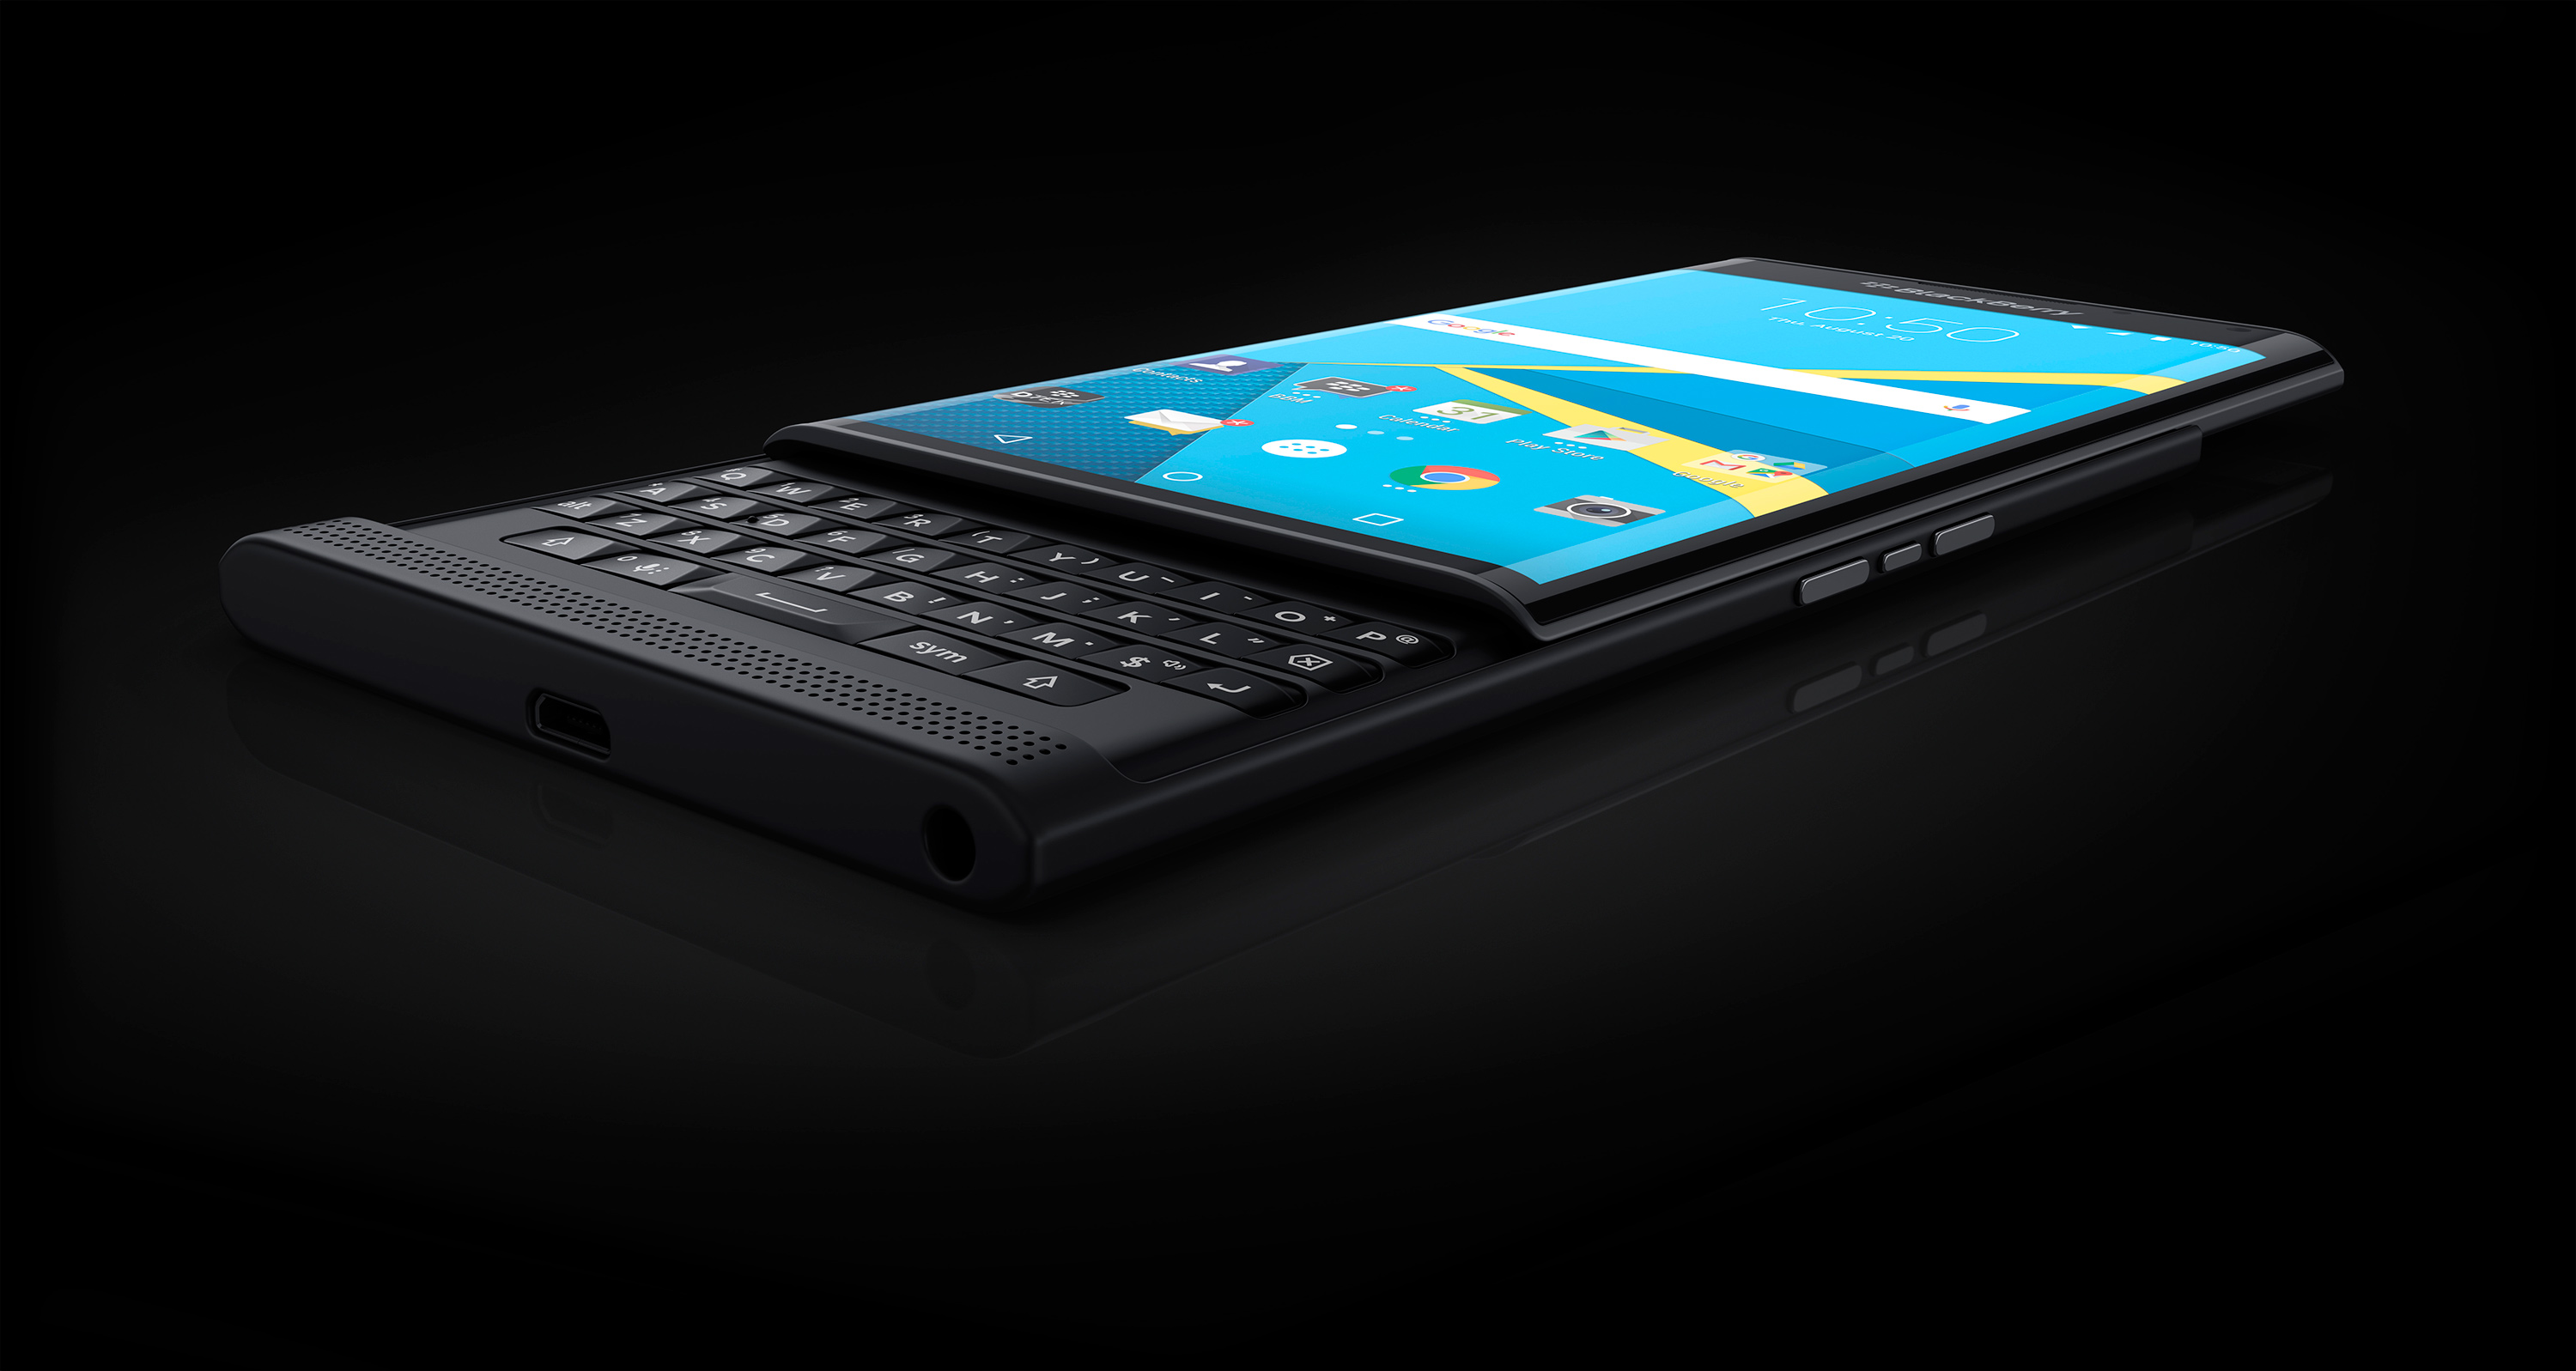 The future QWERTY BlackBerry 5G smartphone might have a single killer